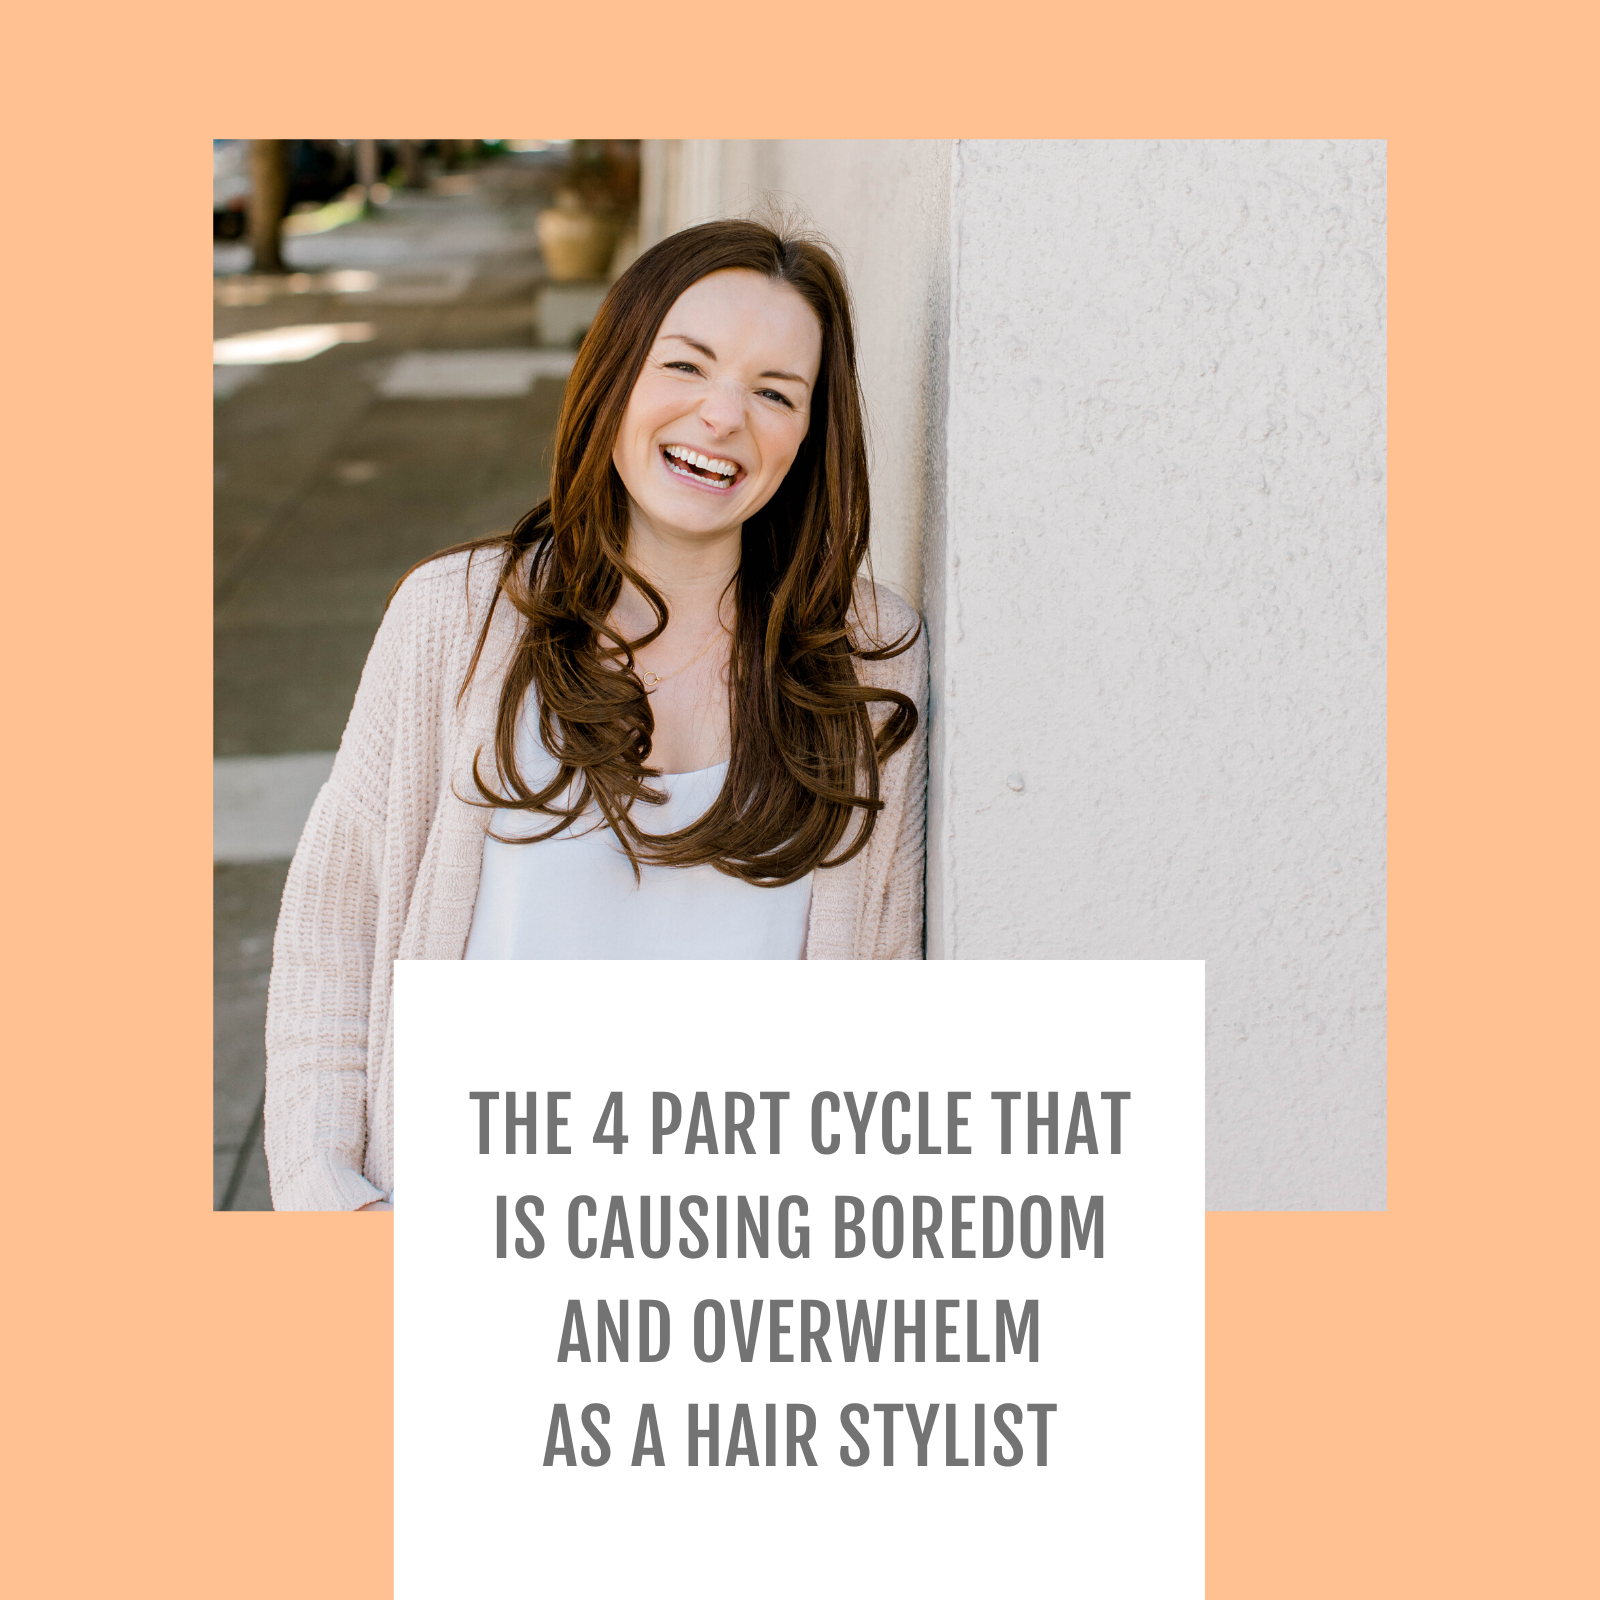 Episode #004: The 4 part cycle that is causing boredom and overwhelm as a hair stylist